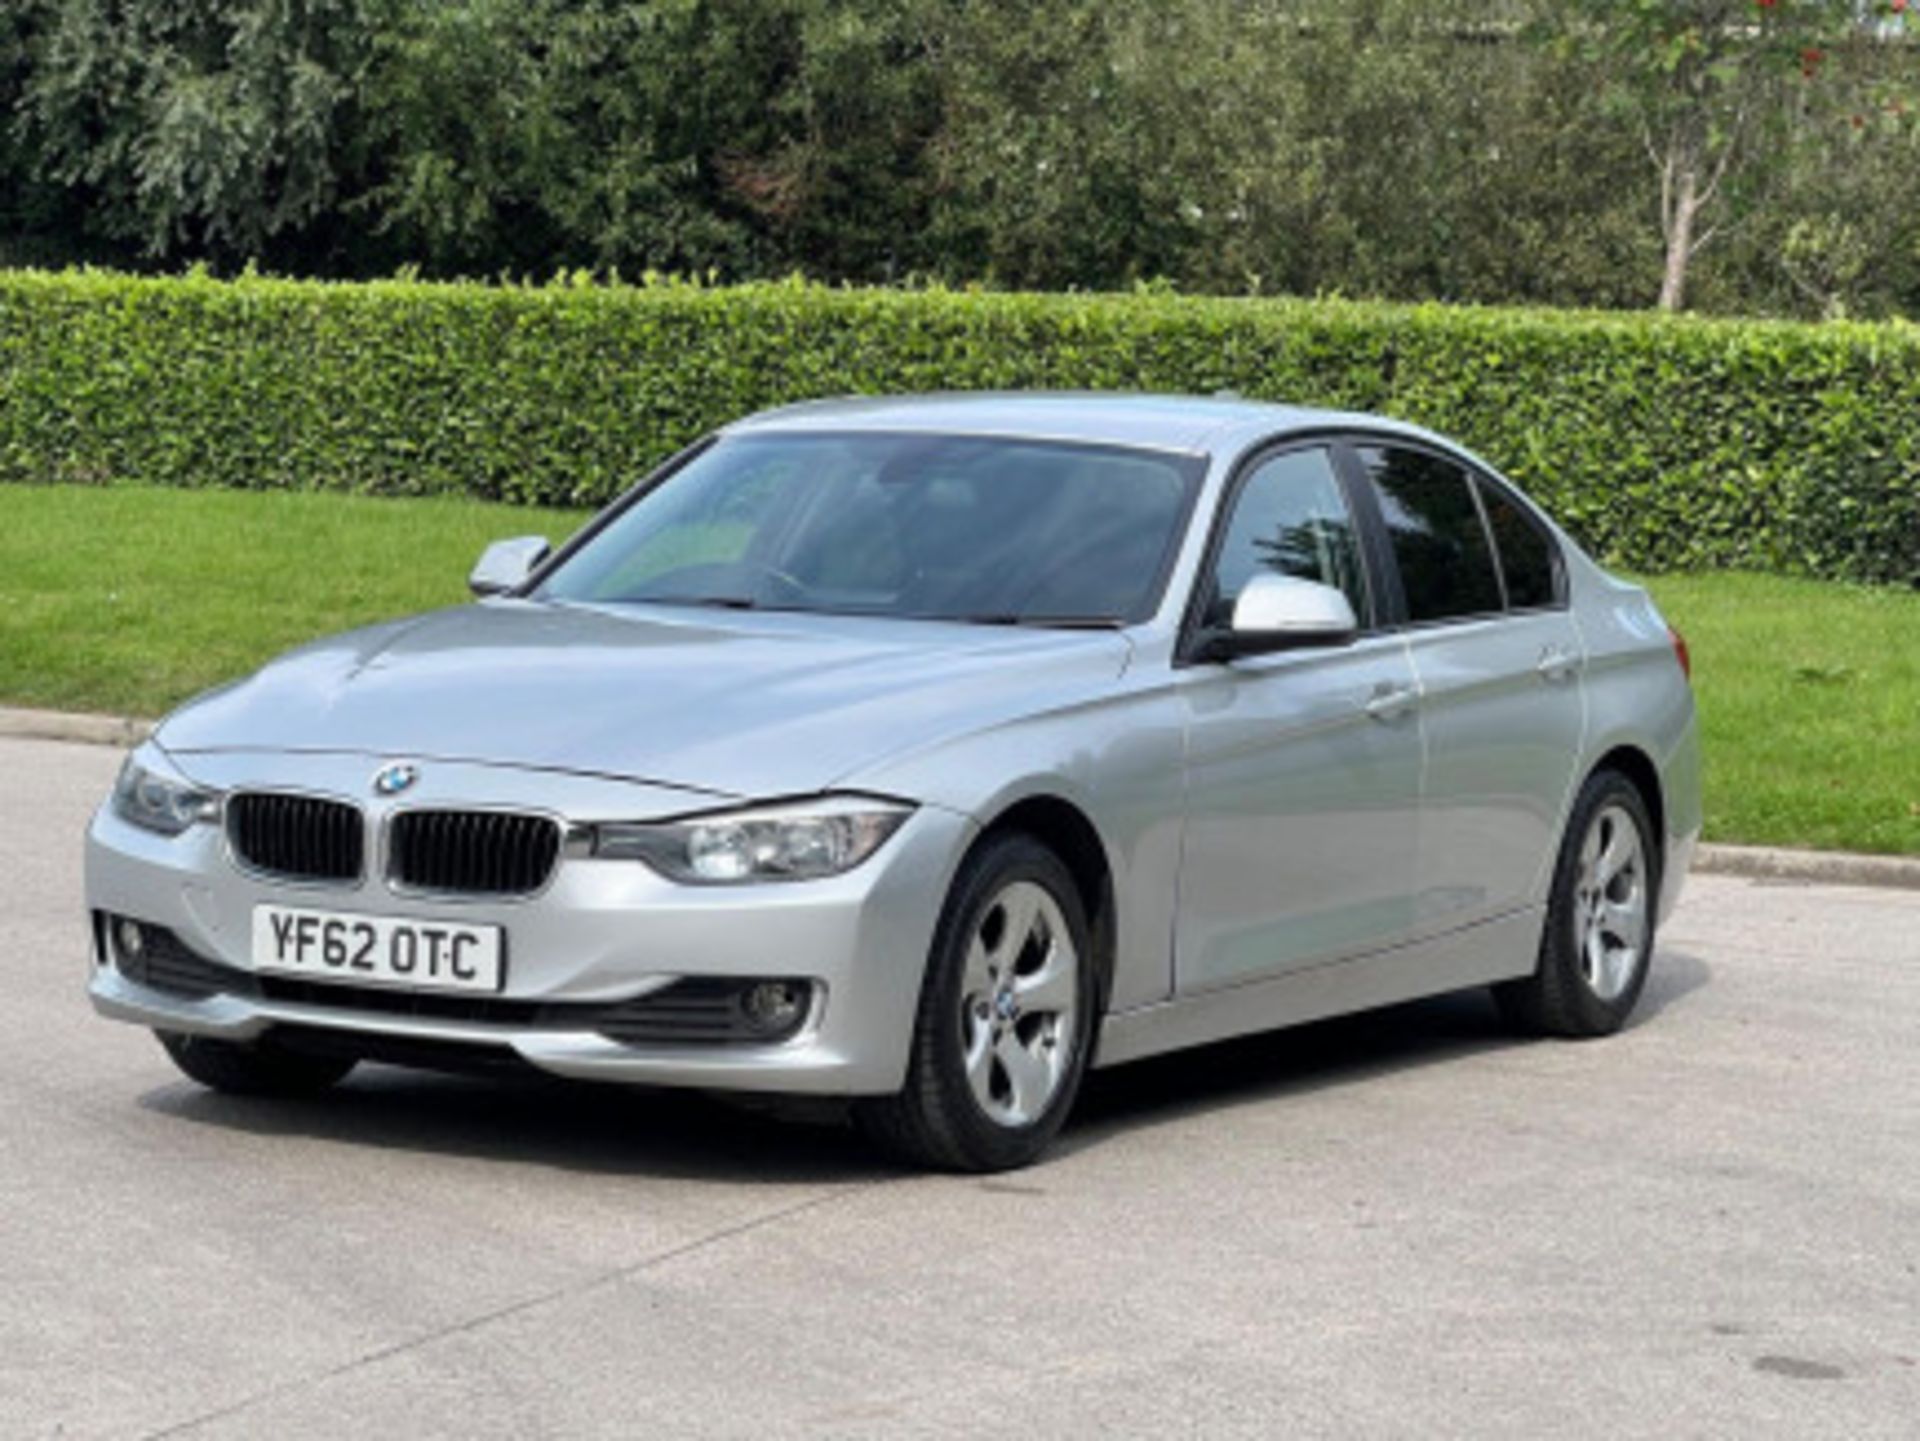 BMW 3 SERIES 2.0 DIESEL ED START STOP - A WELL-MAINTAINED GEM >>--NO VAT ON HAMMER--<< - Image 115 of 229